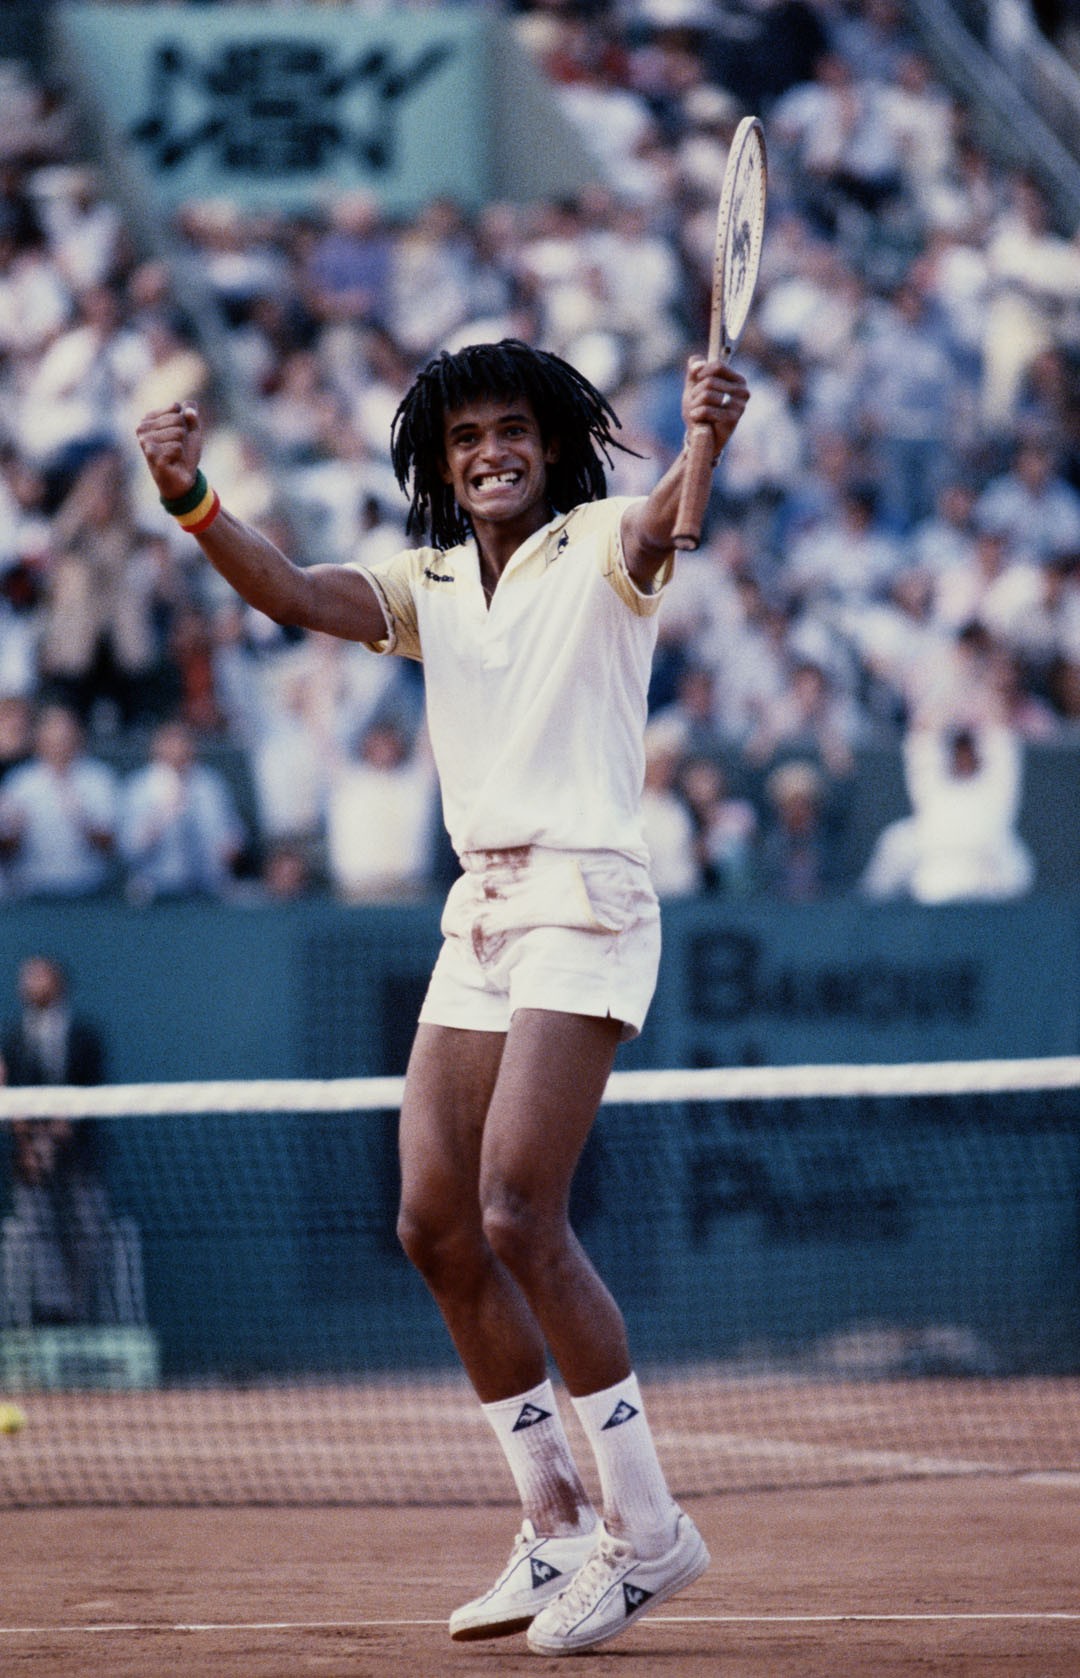 JUN 1983:  YANNICK NOAH OF FRANCE CELEBRATES AFTER WNNING THE MEN's SINGLES TITLE AT THE 1983 FRENCH OPEN GRAND SLAM. (Foto: Getty Images)